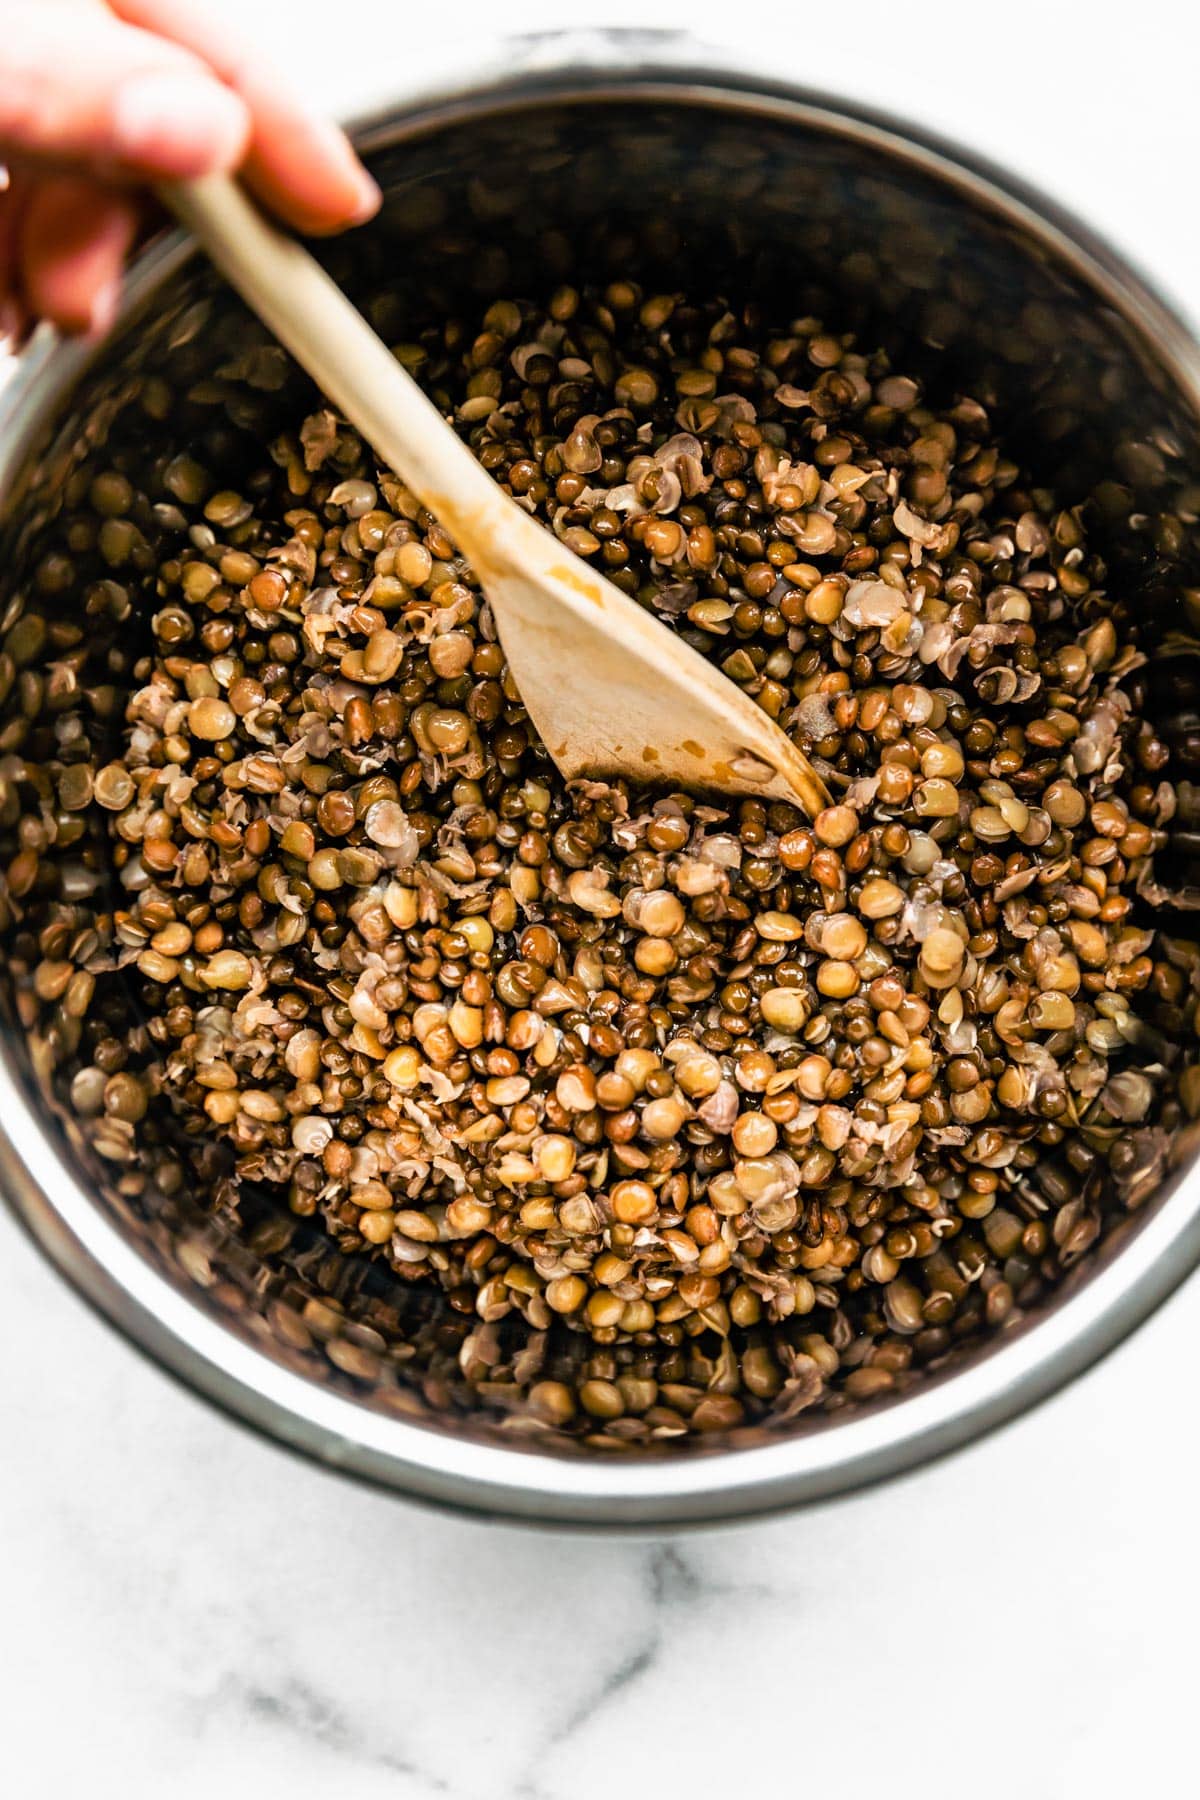 Brown lentils being stirred in a pot with a wooden spoon.